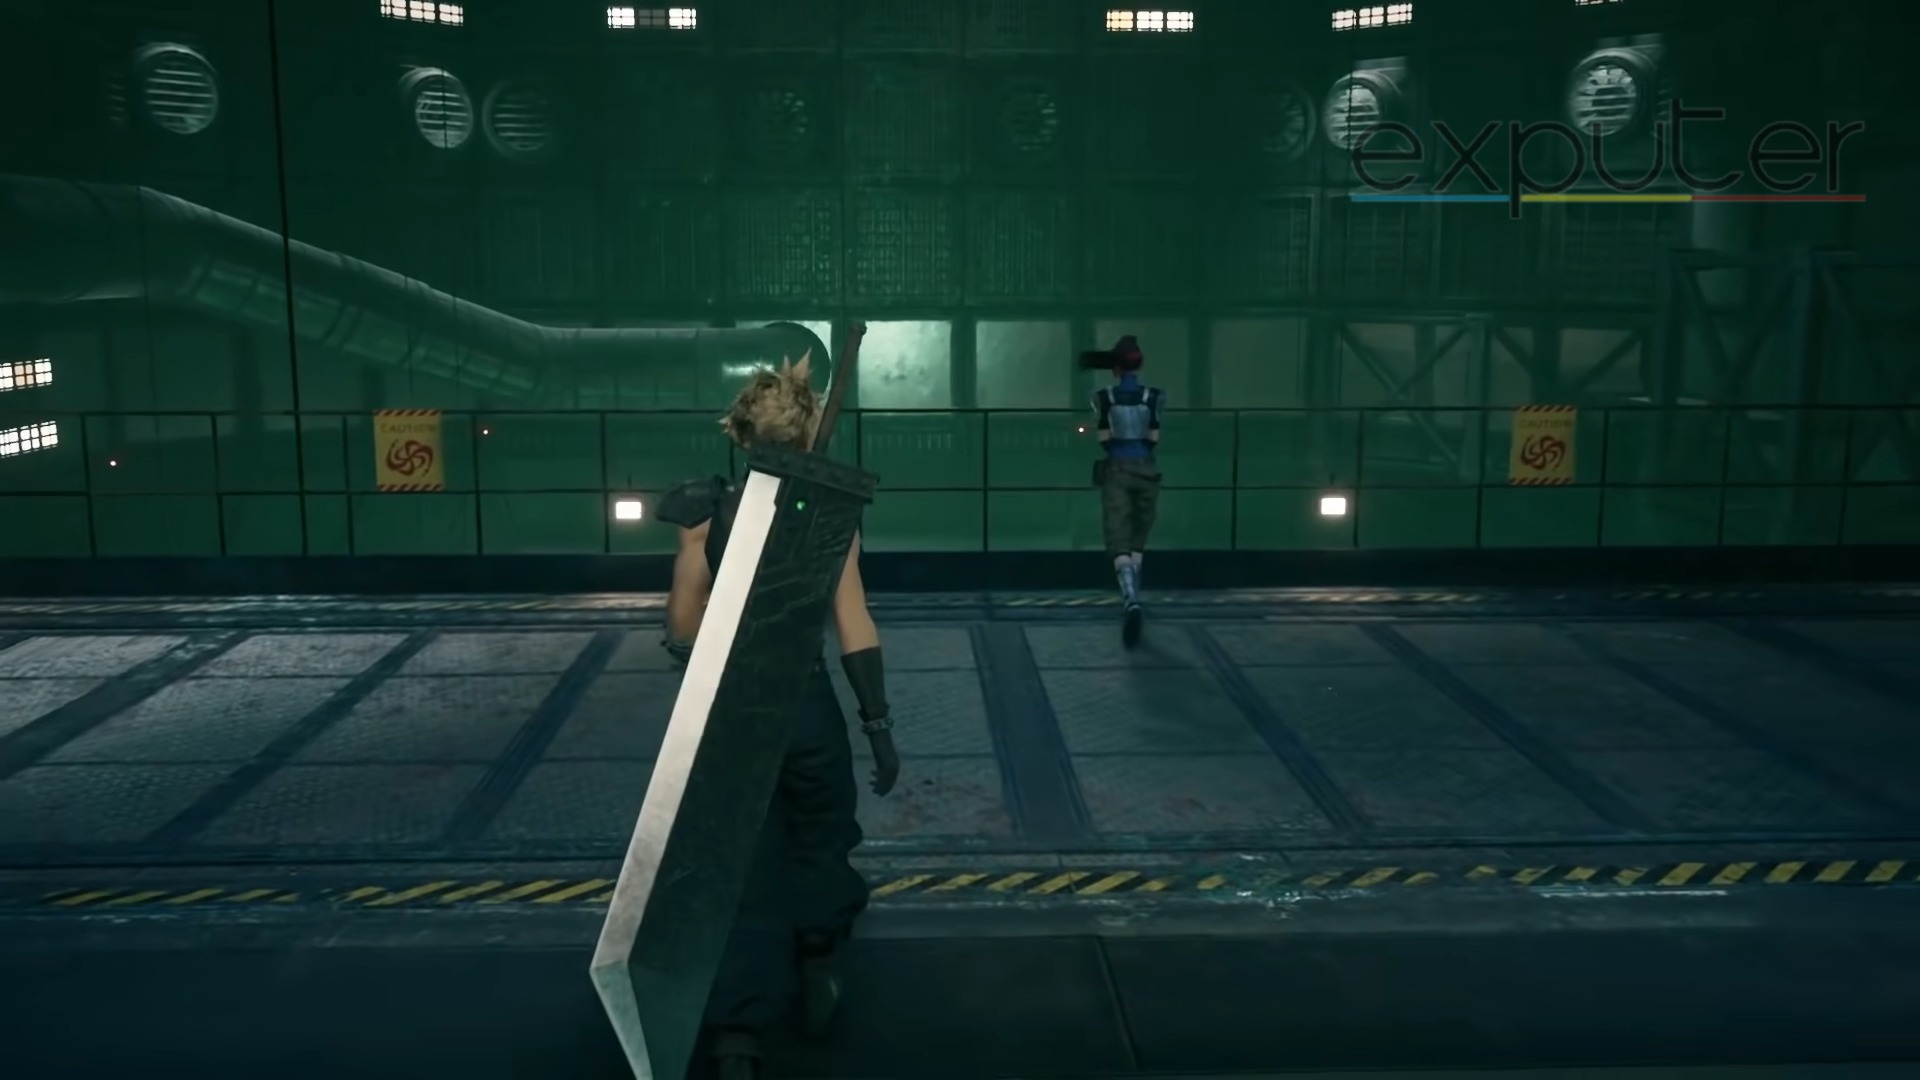 A spiky yelllow-haired boy with a sword approaching a girl with a ponytail in a factory-like area.